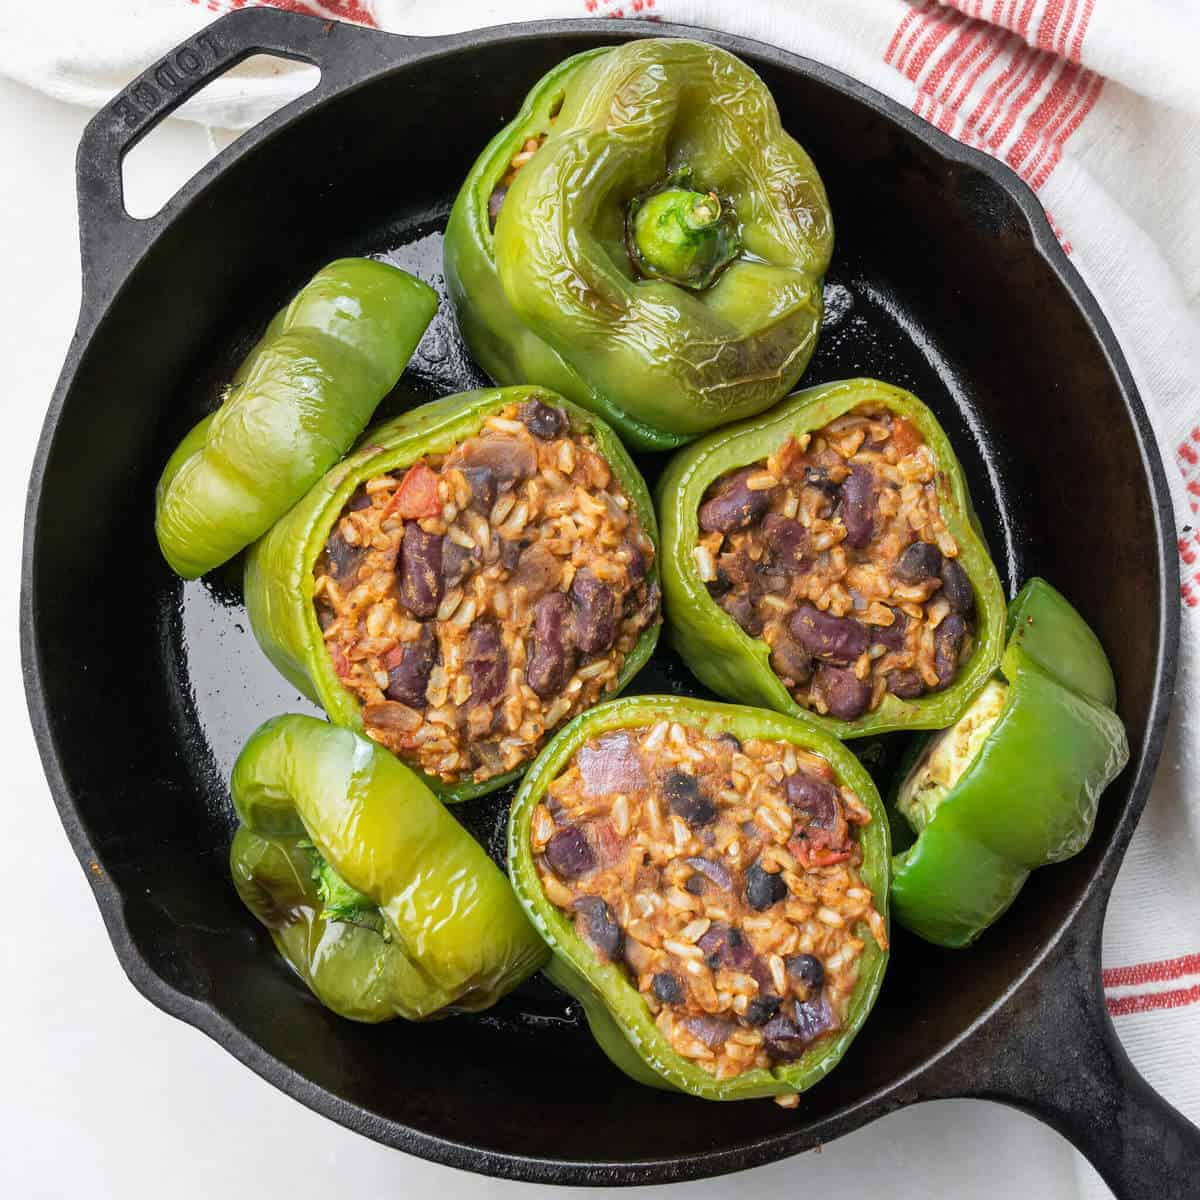 Southwest stuffed green bell peppers in a case iron skillet.